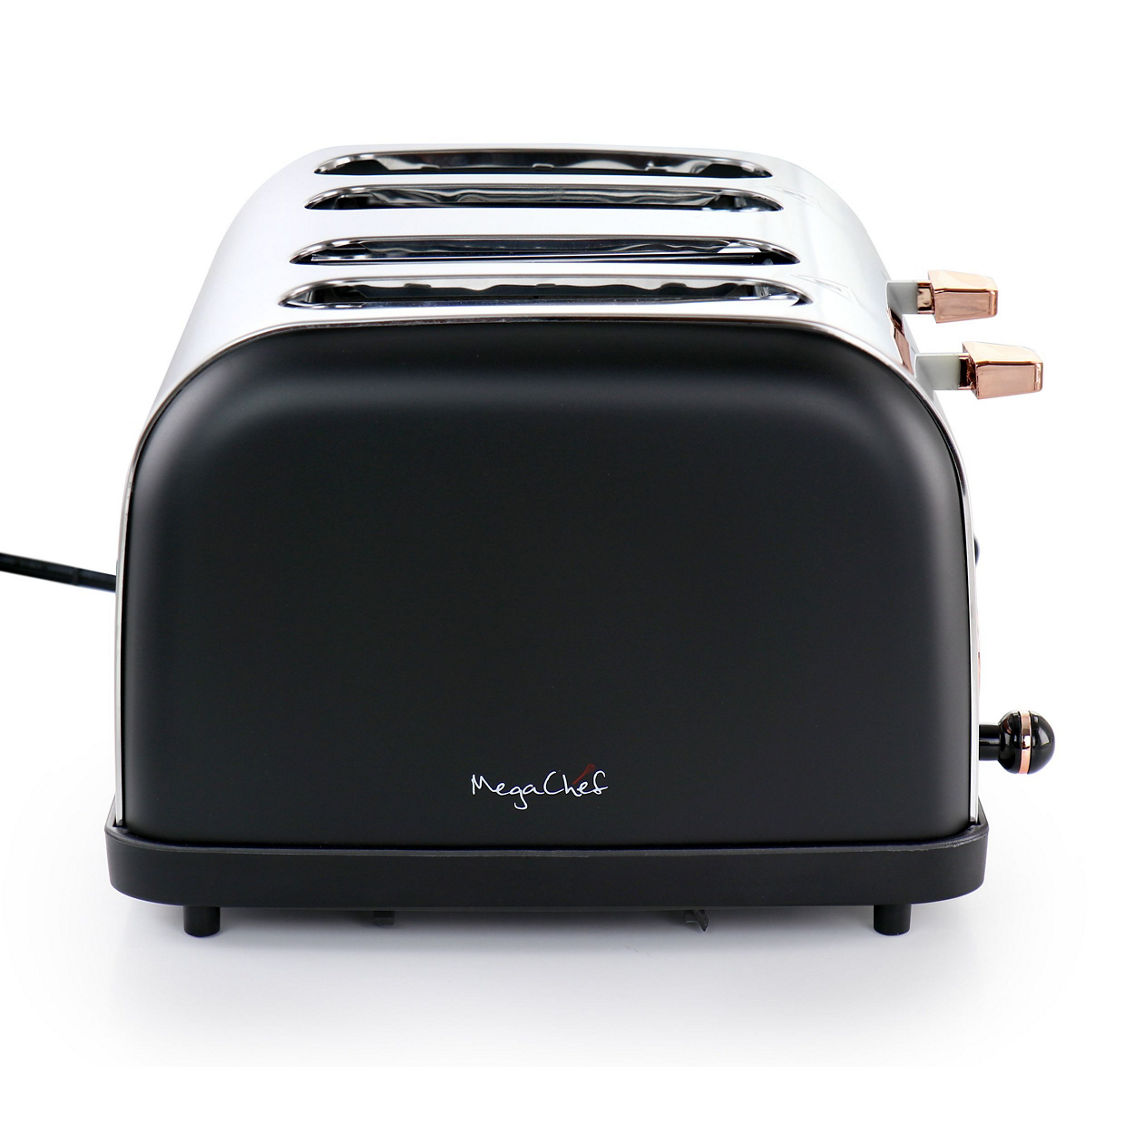 MegaChef 4 Slice Wide Slot Toaster with Variable Browning in Black and Rose Gold - Image 4 of 5